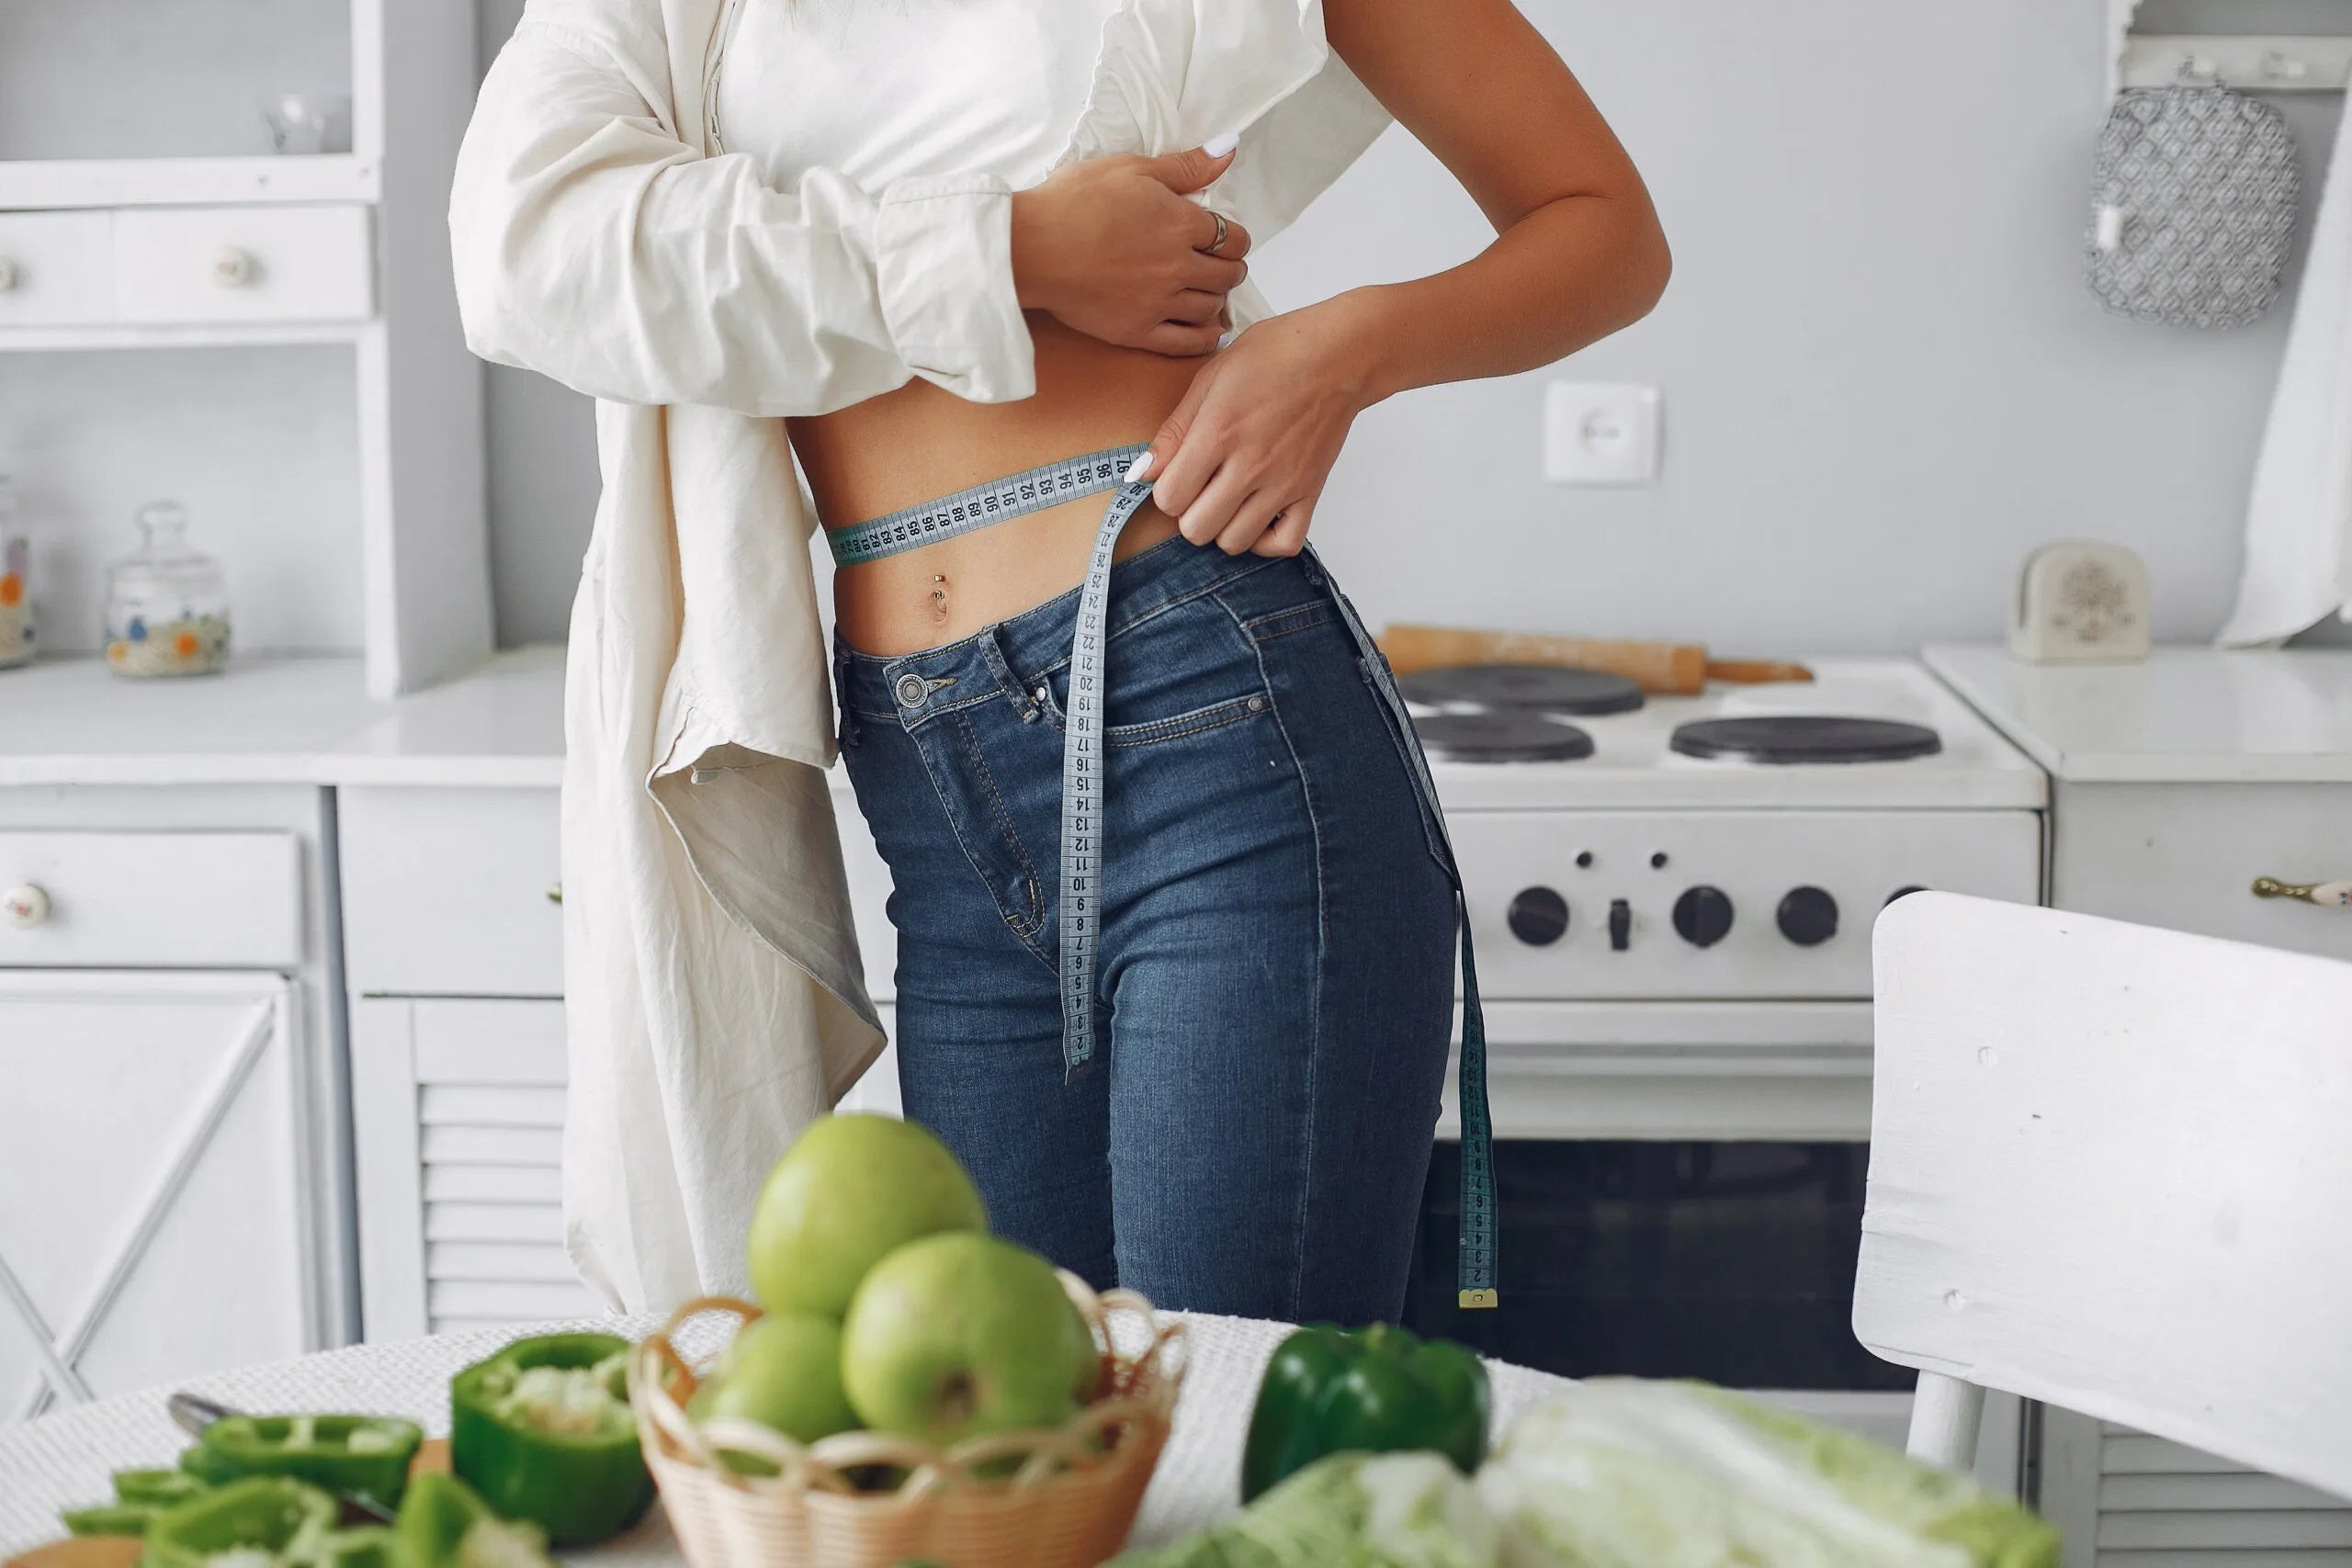 beautiful-and-sporty-woman-in-a-kitchen-with-vegetables-scaled.webp__PID:bea7aebc-3129-40c3-8e2c-66919bb7acfc